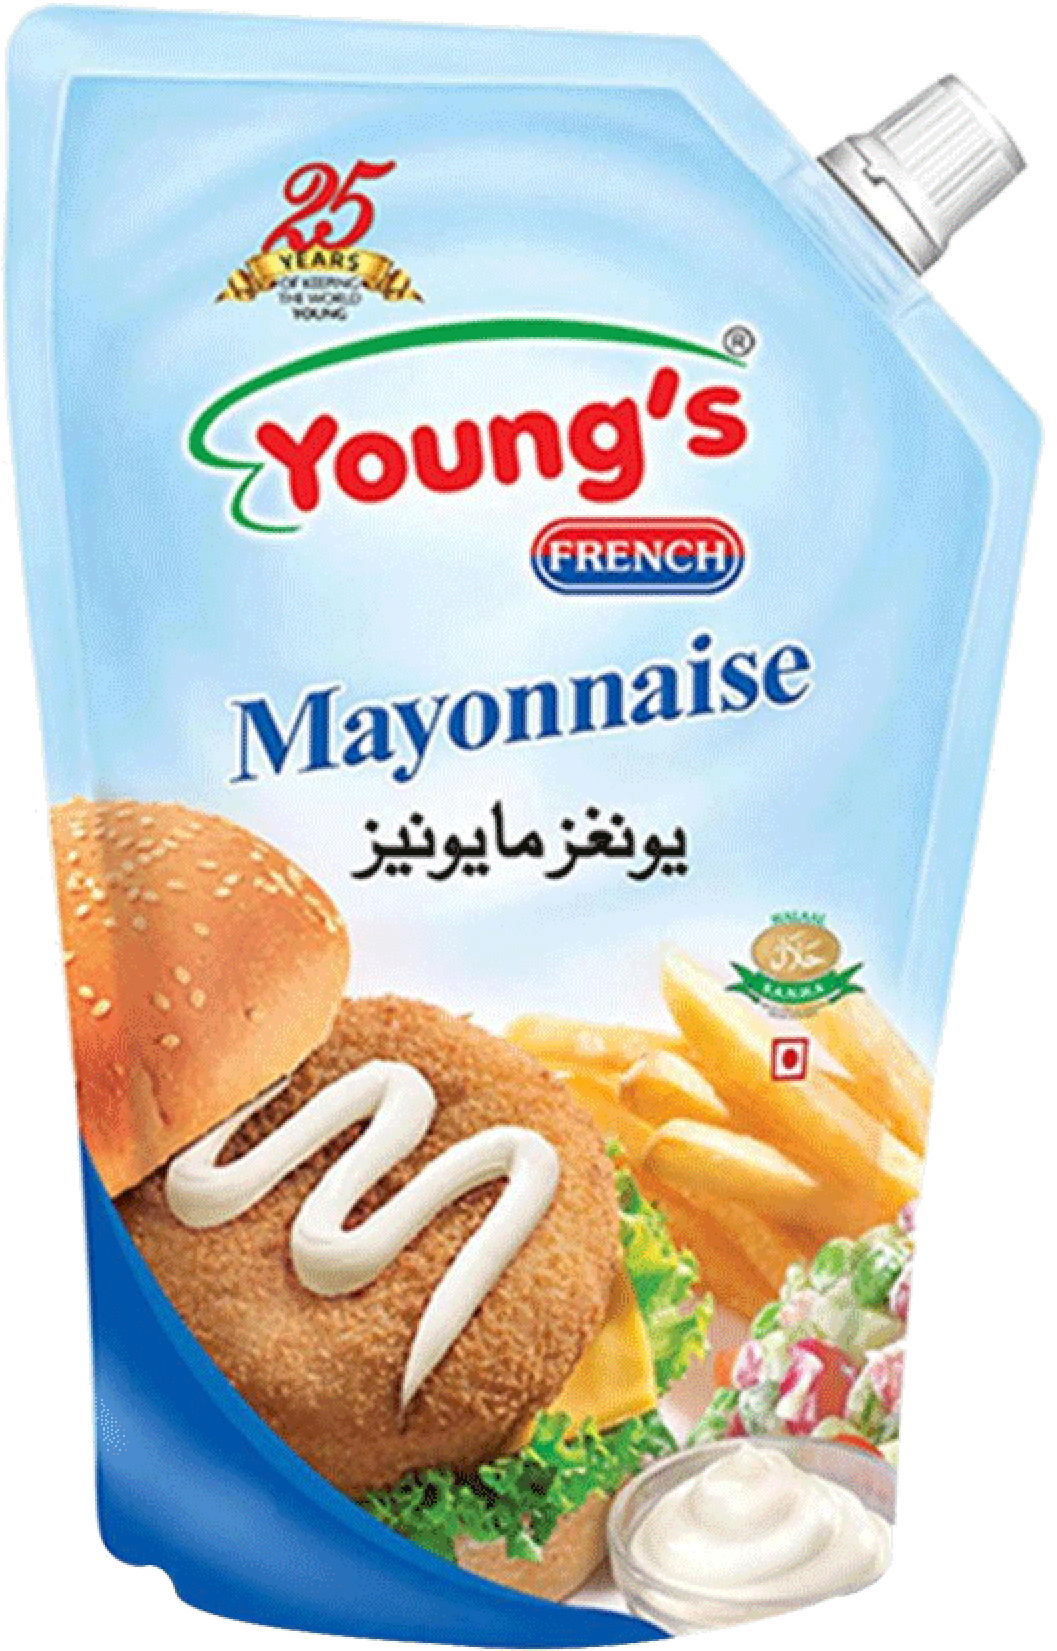 Youngs French Mayonnaise Pouch Product Image PNG